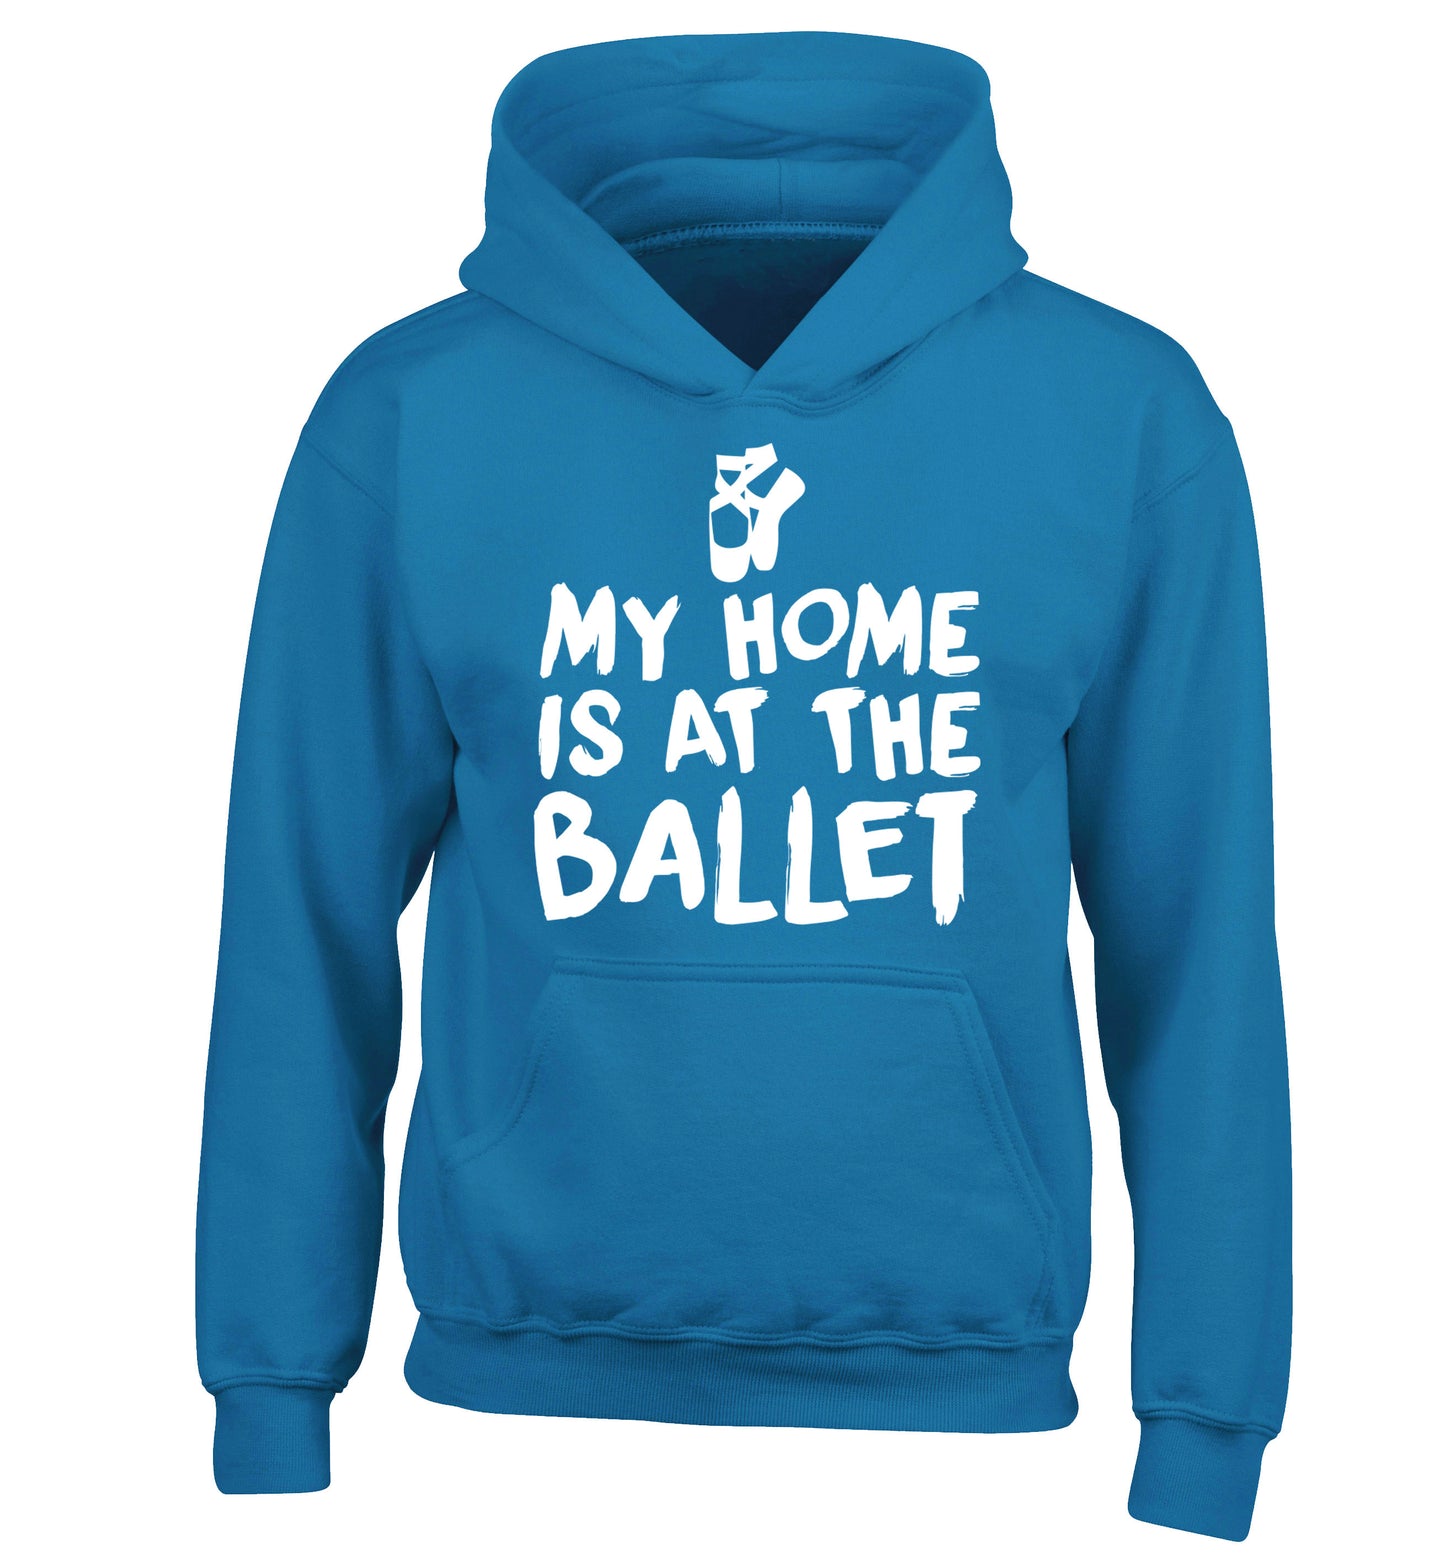 My home is at the ballet children's blue hoodie 12-14 Years